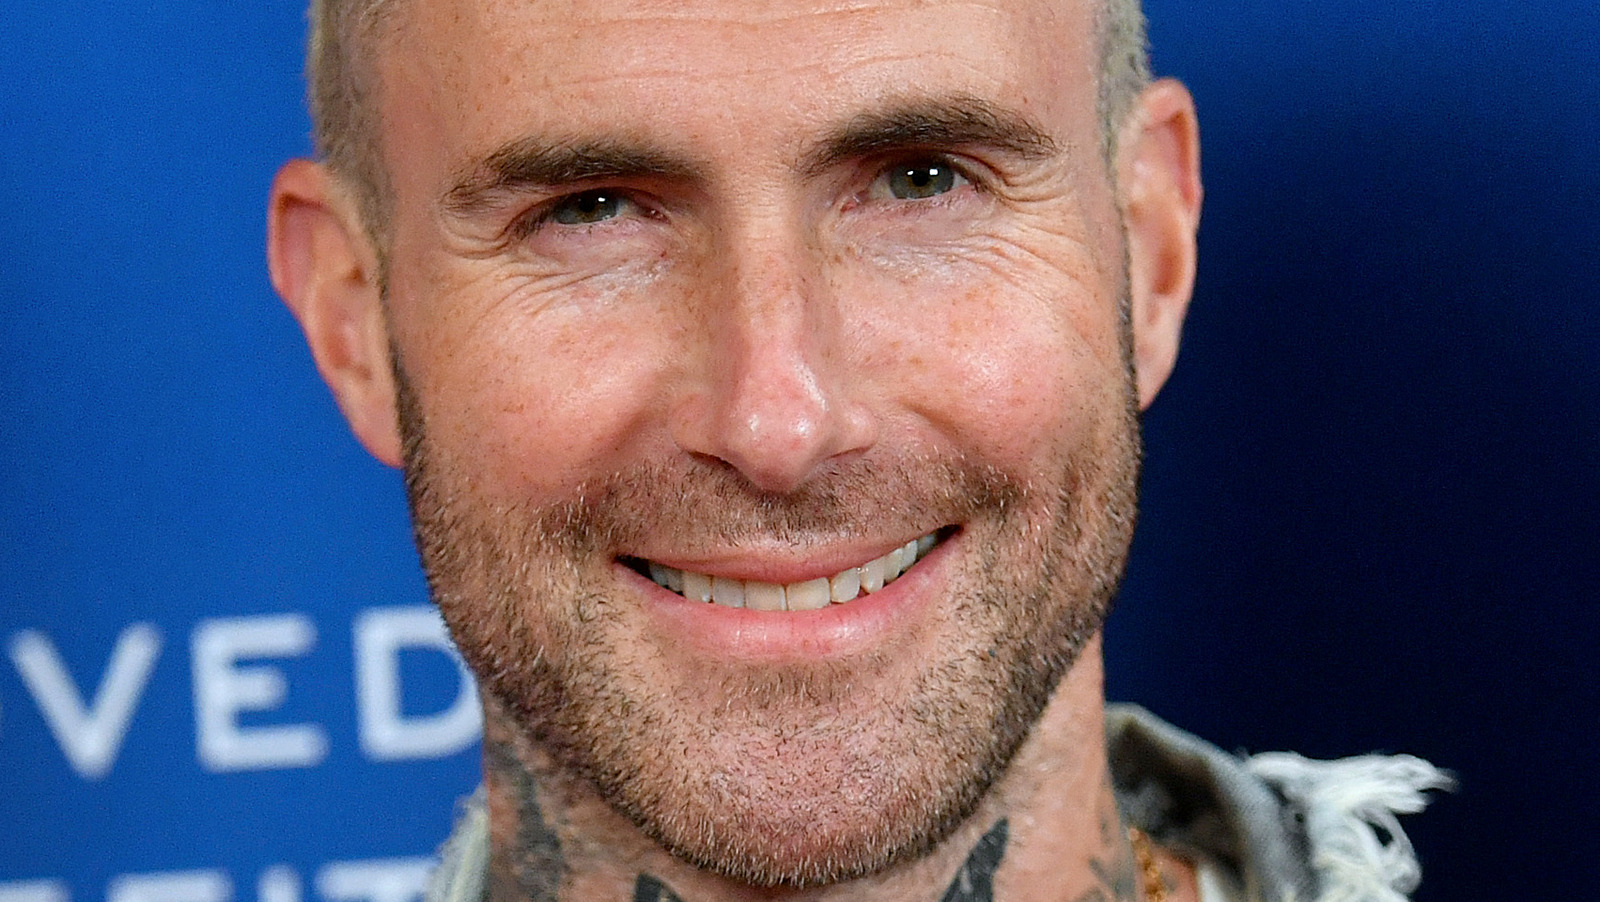 Adam Levine Did A Role In Jessica Simpson’s Split From Nick Lachey